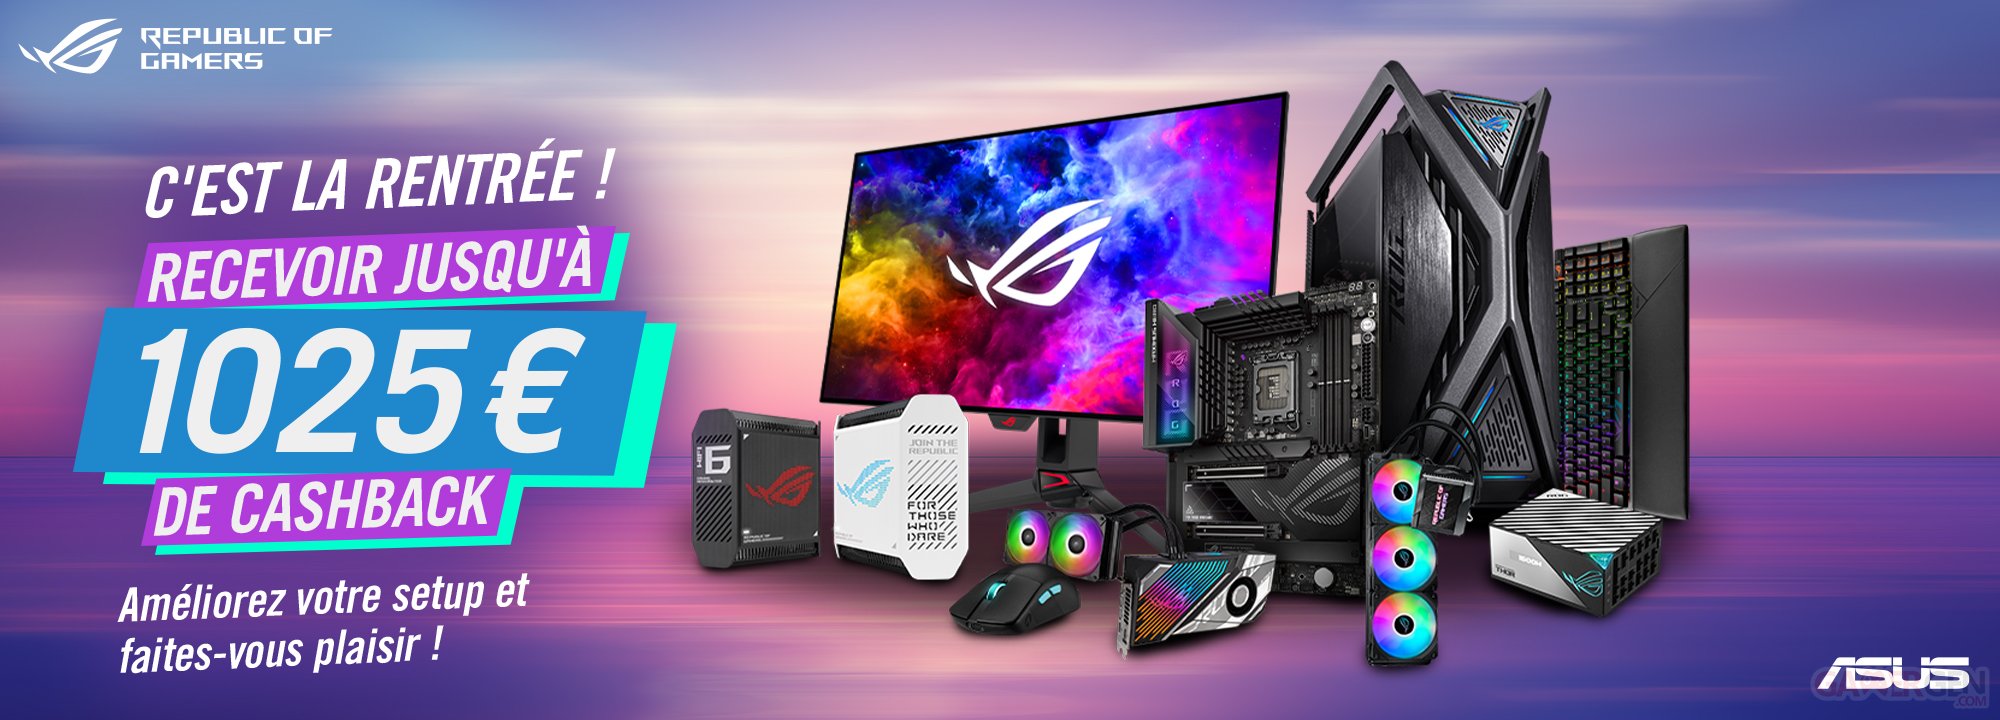 Gaming Boîtiers PC｜ROG - Republic of Gamers｜France